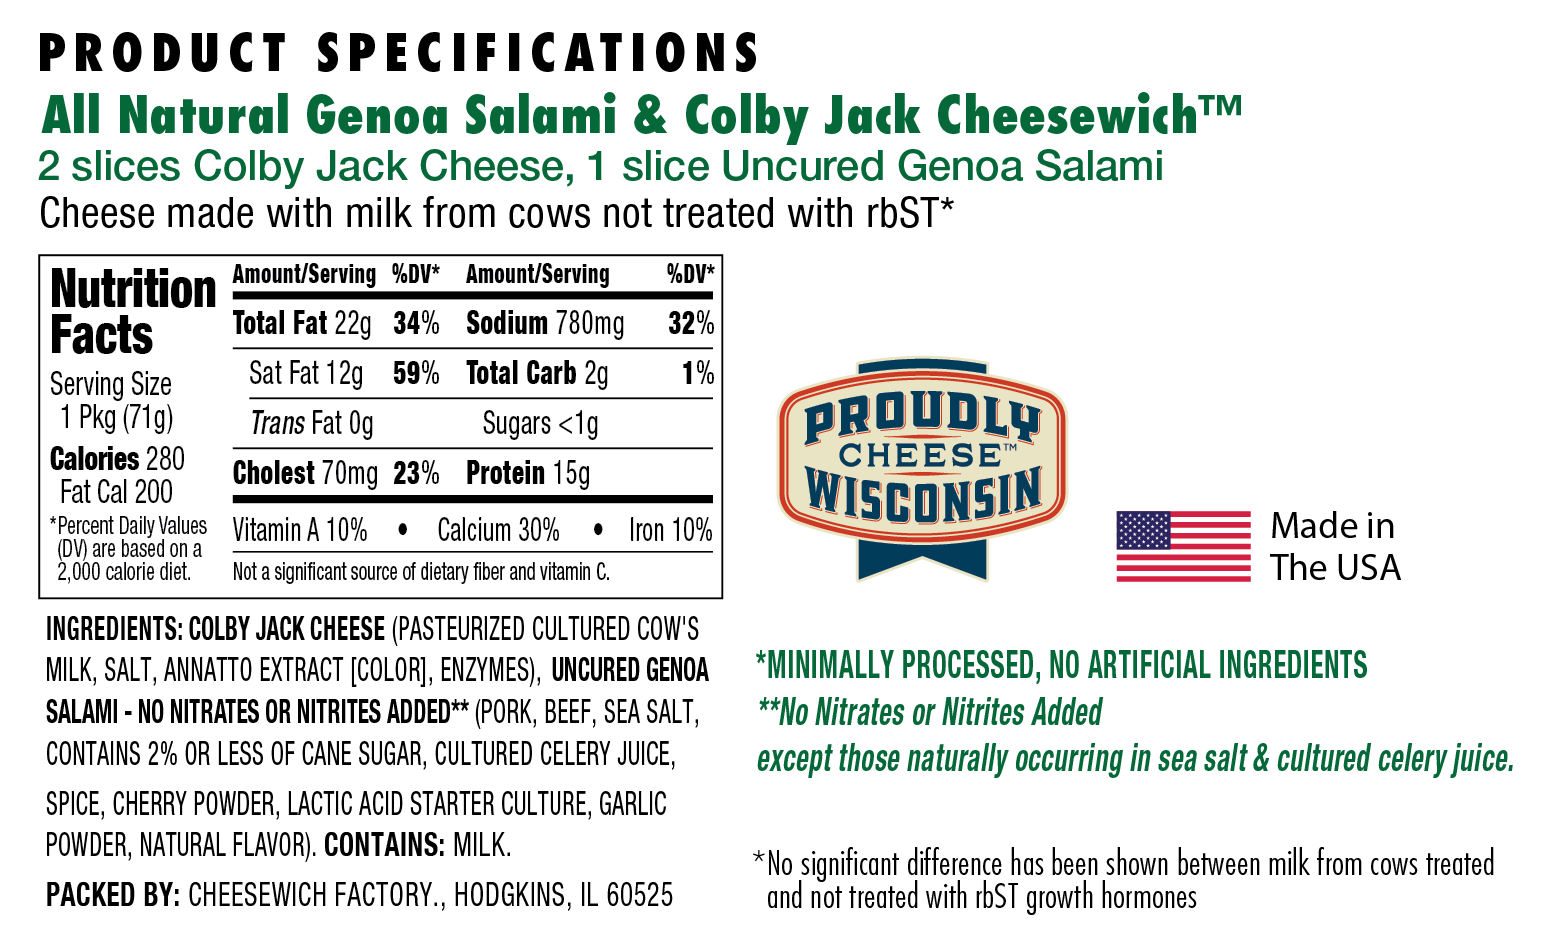 Nutrition information and ingredients for All Natural Genoa Salami and Colby Jack Cheesewich™